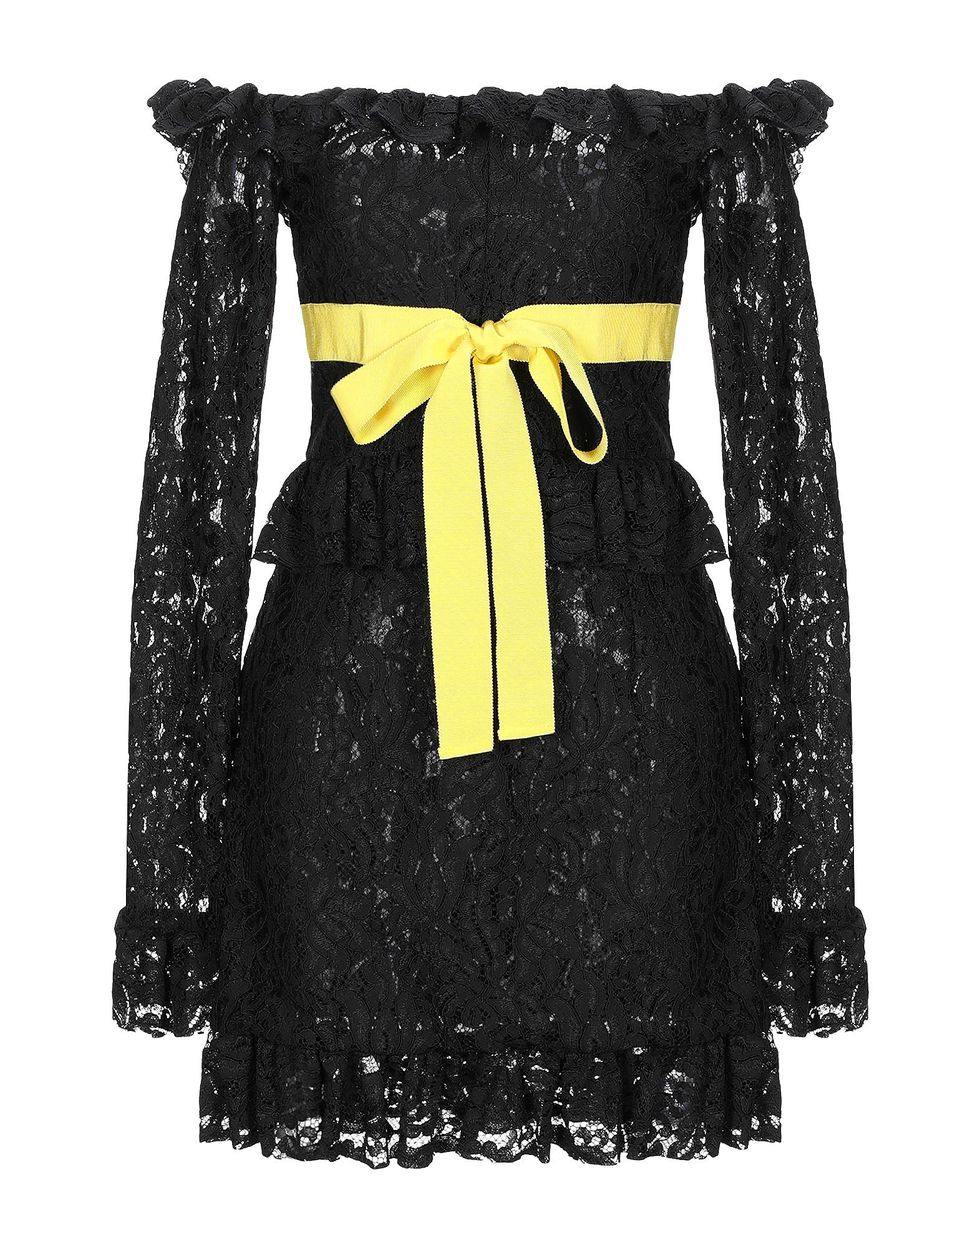 Clothing, Black, Dress, Yellow, Cocktail dress, Day dress, Little black dress, Sleeve, Lace, Outerwear, 